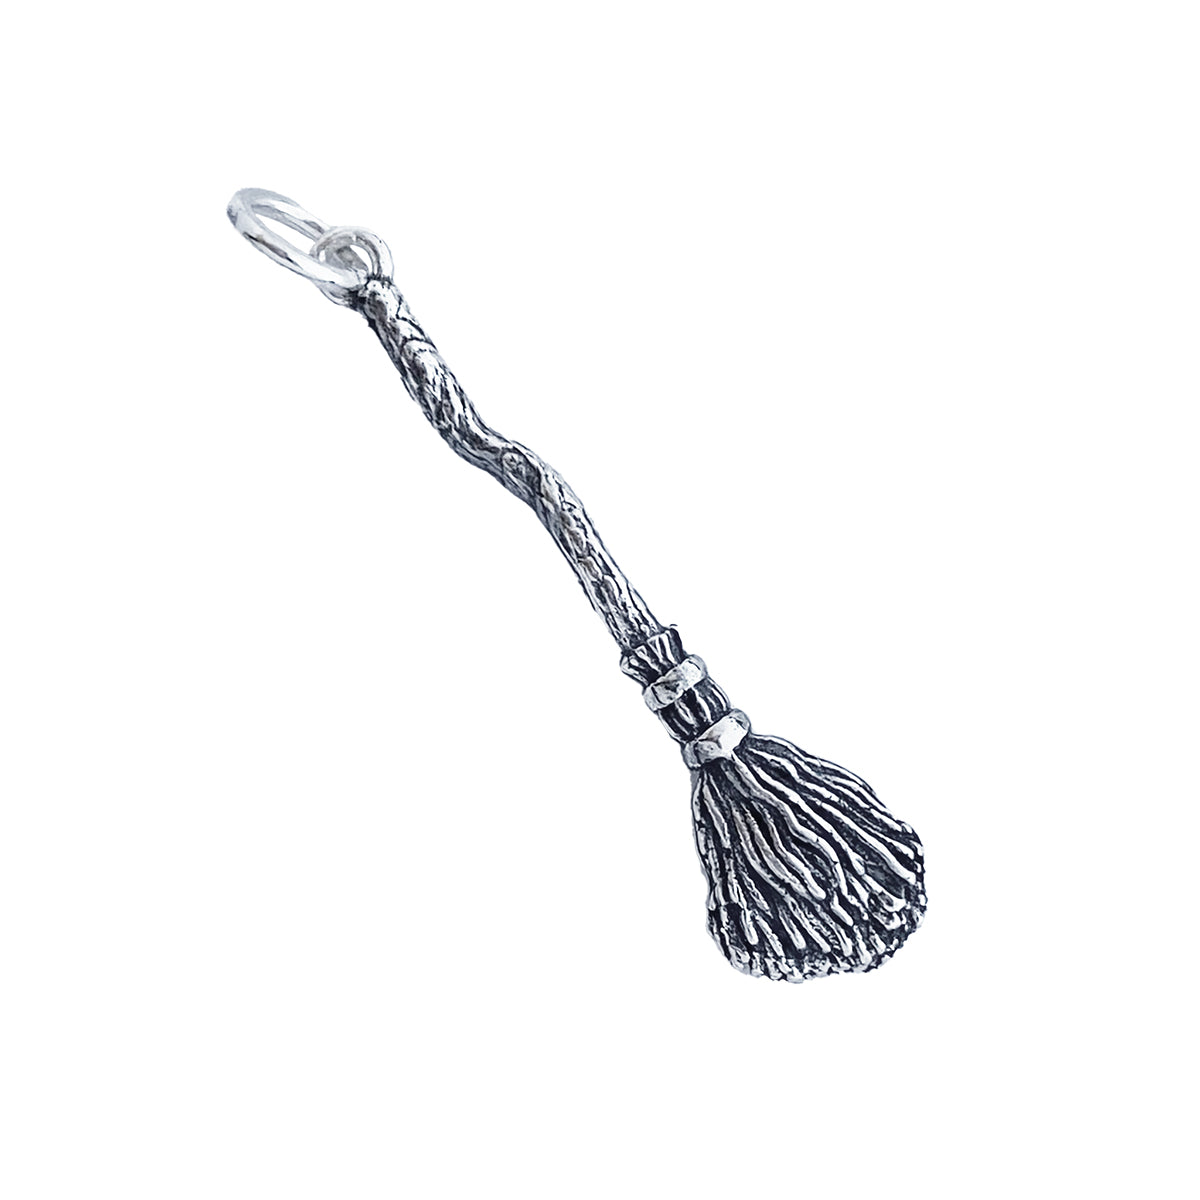 Sterling silver broom charm or pendant